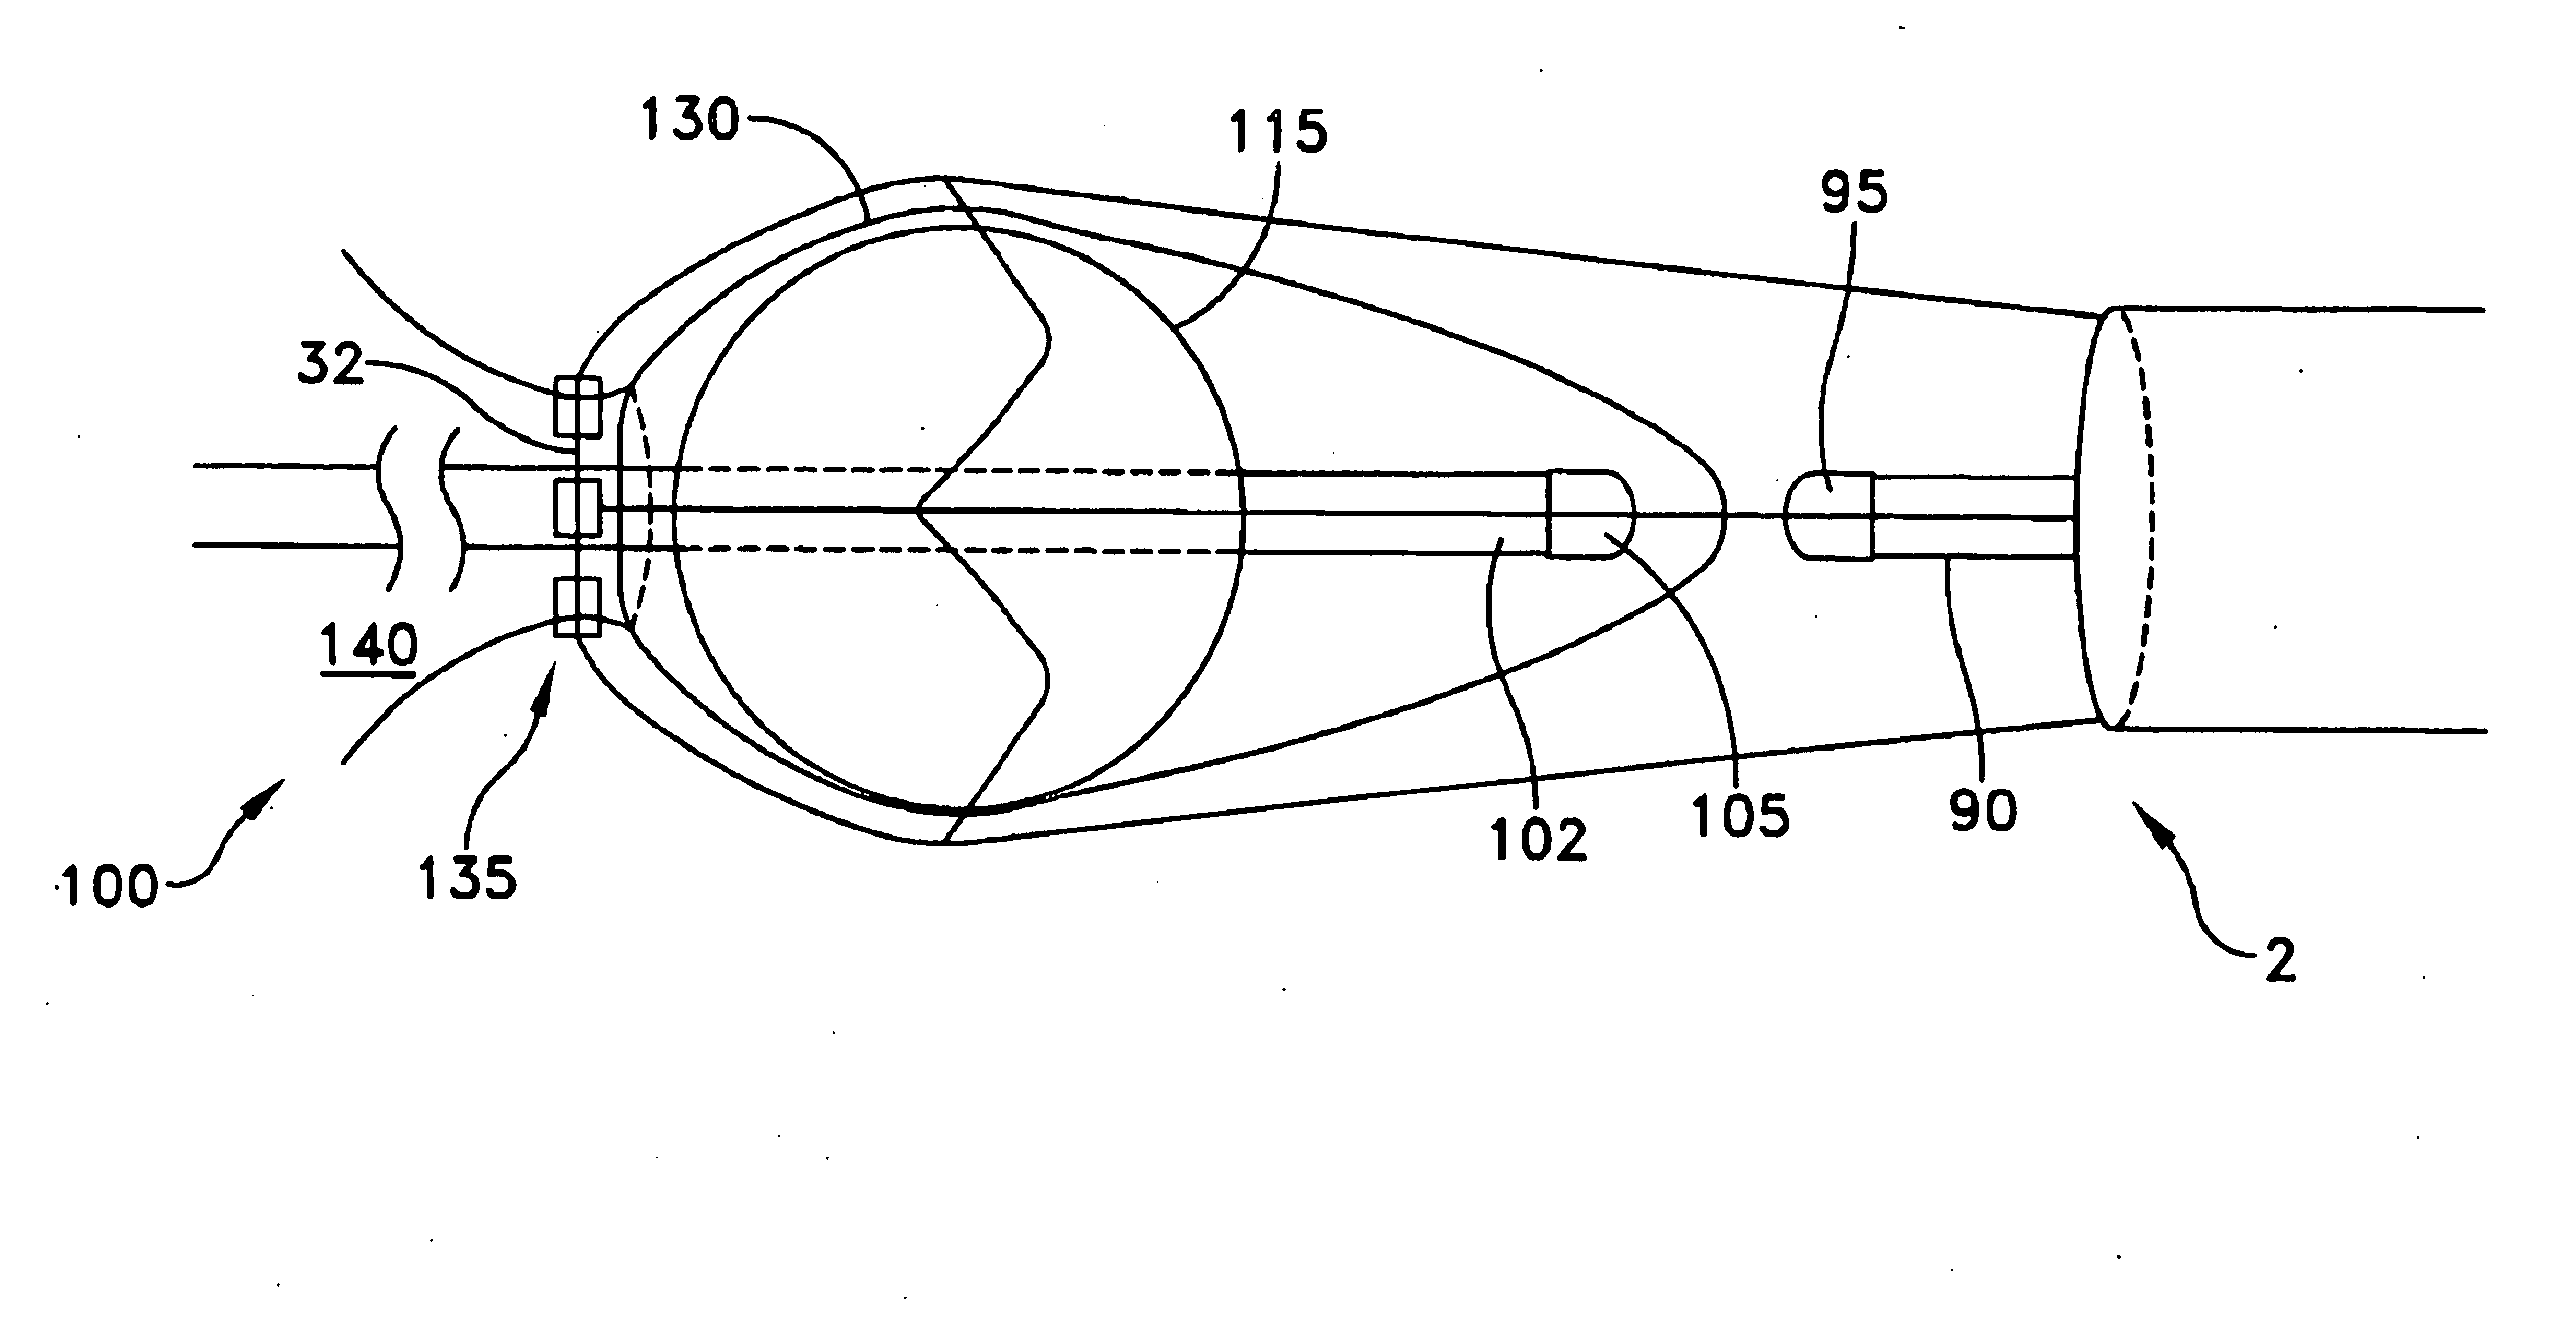 Apparatus and method for the ligation of tissue